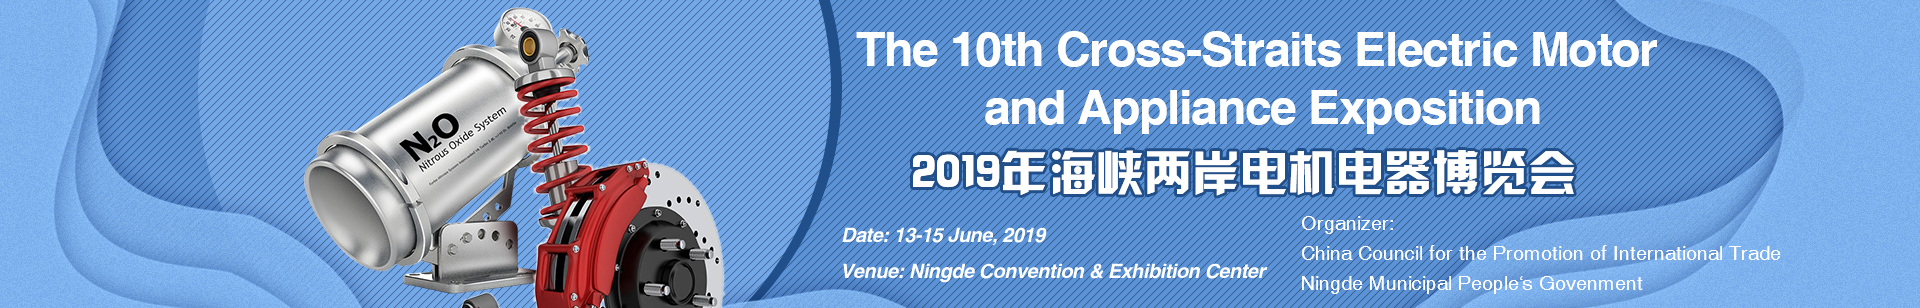 The 10th Cross-Straits Electric Motor and Appliance Exposition